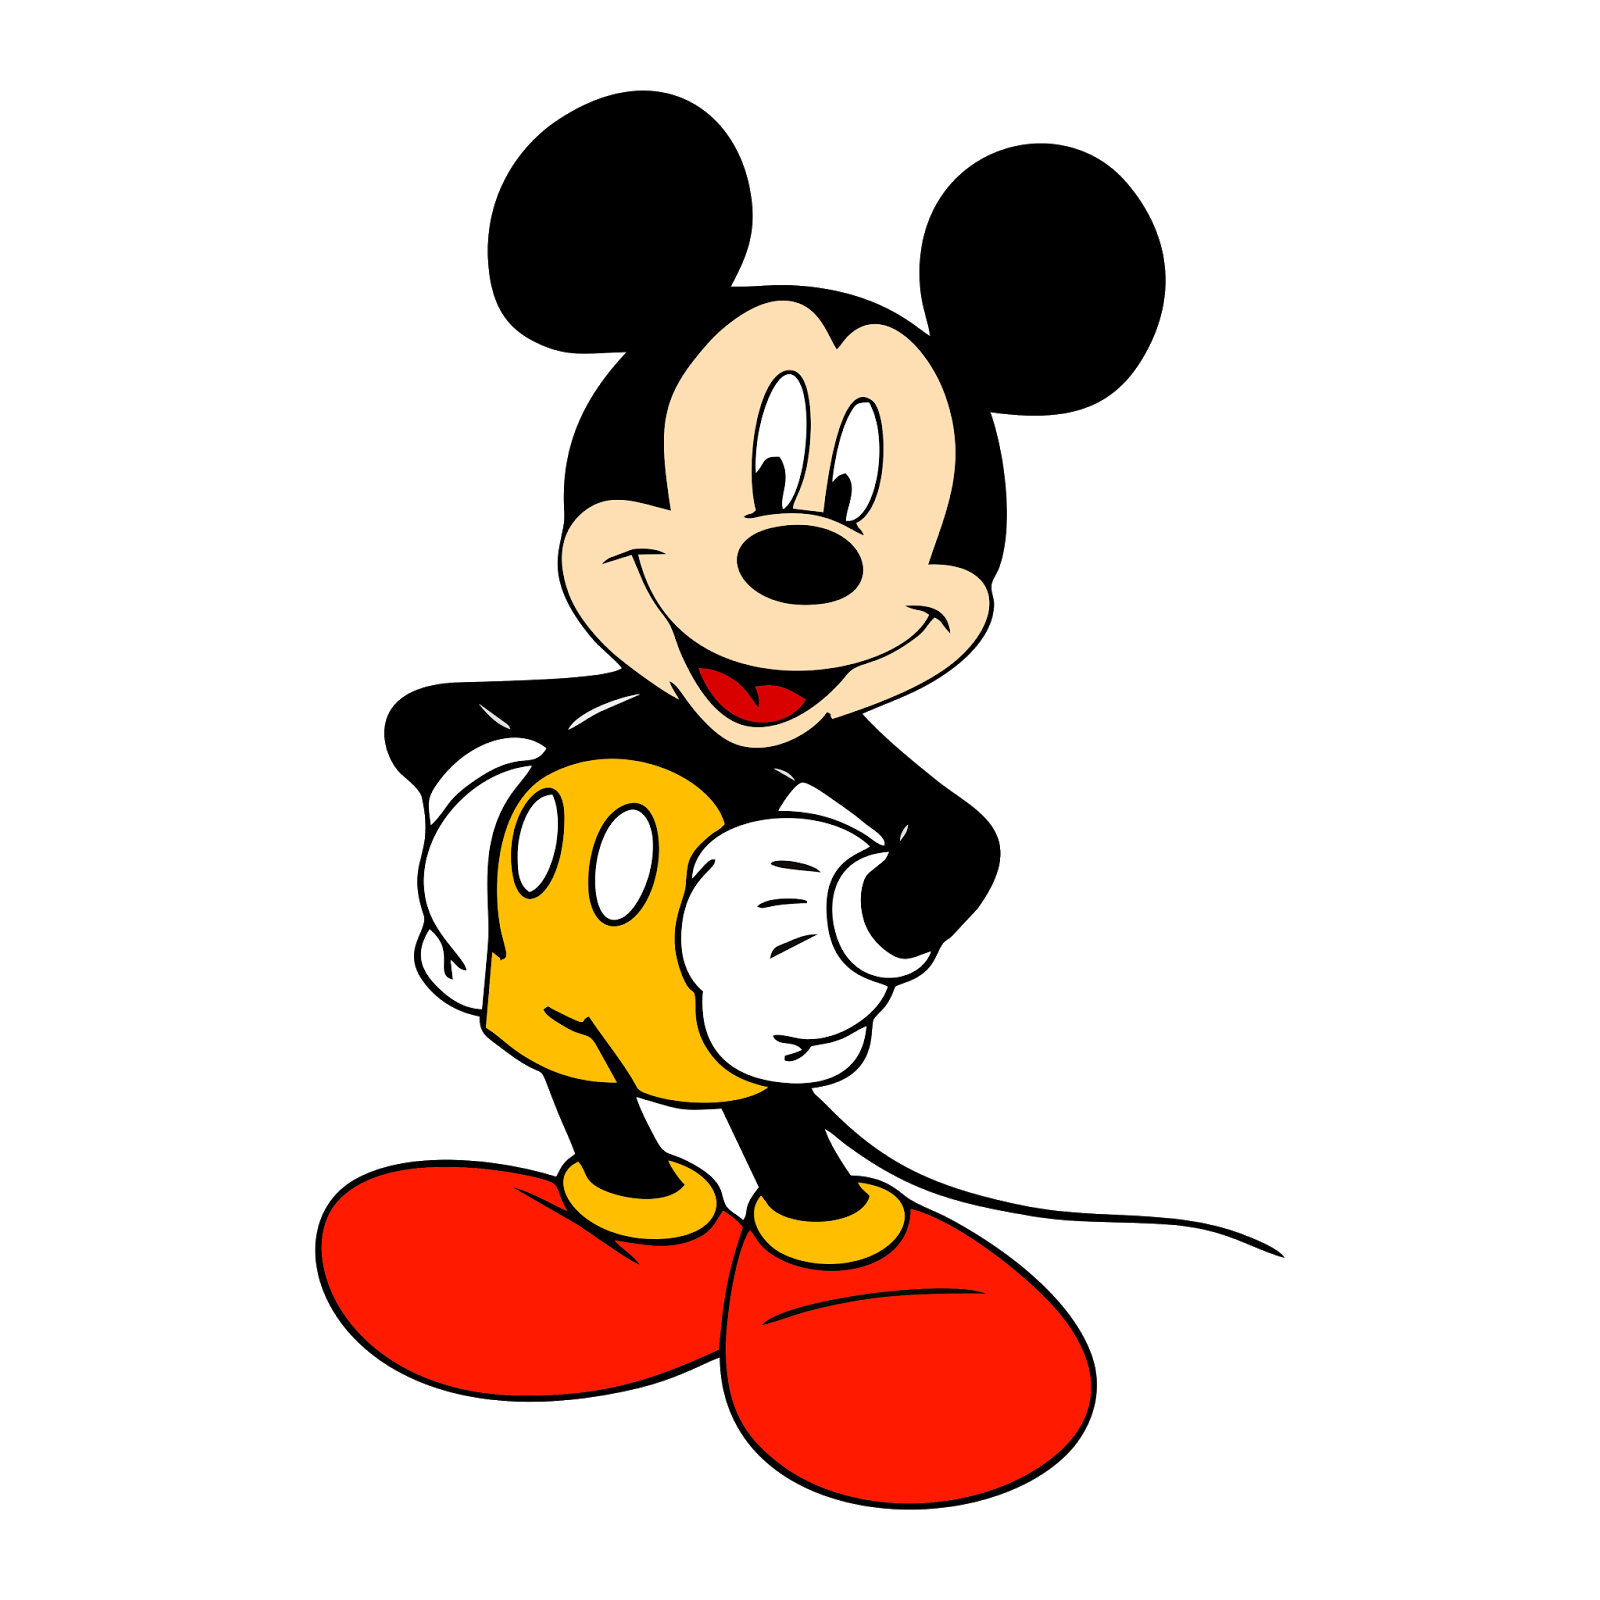 Download Vektor Mickey  mouse  HD Format PNG DODO GRAFIS